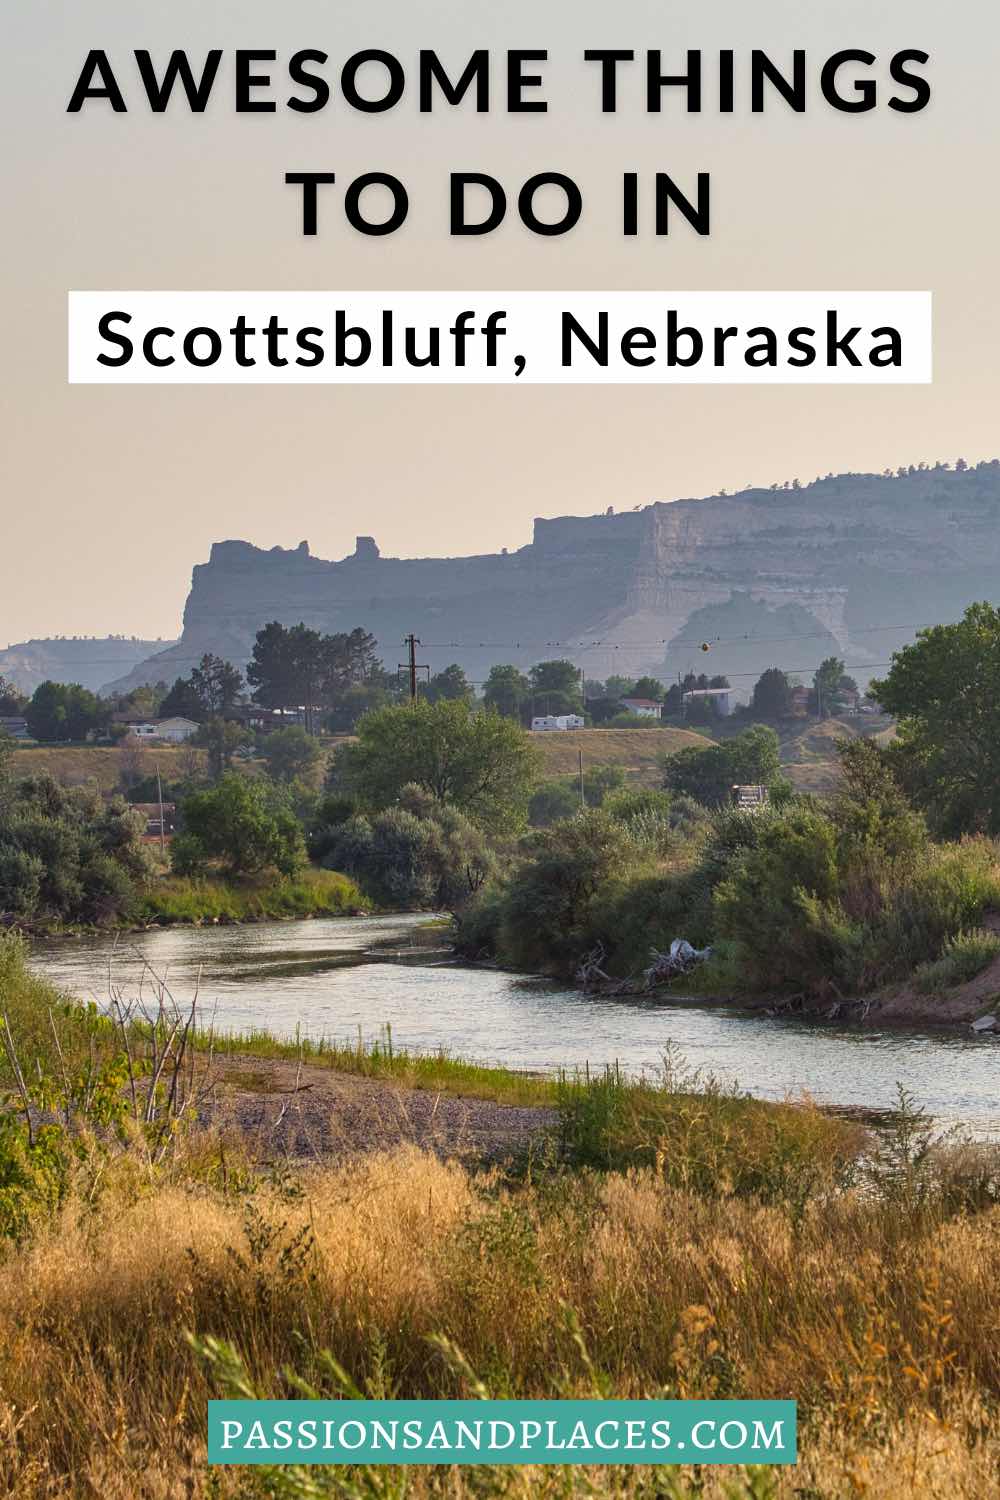 Scottsbluff, NE, is an offbeat town in western Nebraska with a lot to offer. This list of things to do in Scottsbluff includes art, history, food, outdoors, and much more. Read about museums, restaurants, day trips from Scottsbluff, and of course Scotts Bluff National Monument. #scottsbluffne #nebraskapandandle #westnebraska